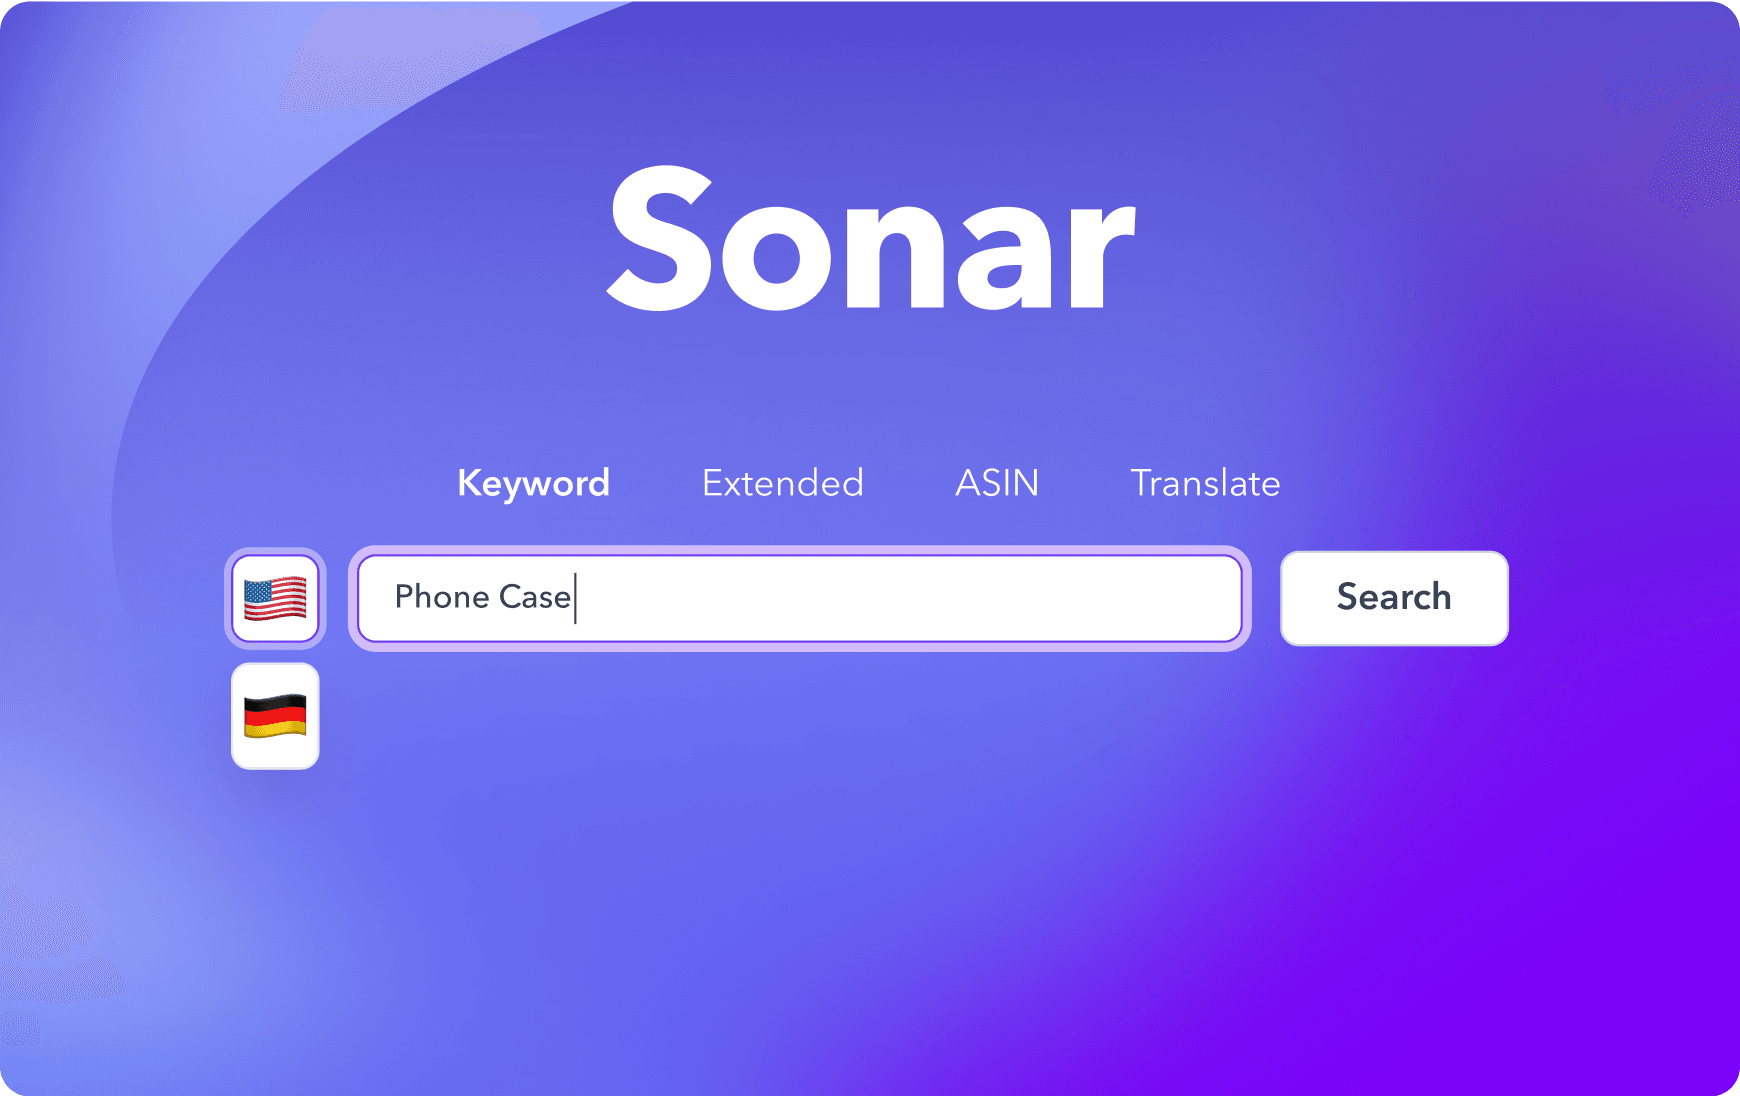 Sonar tool in action